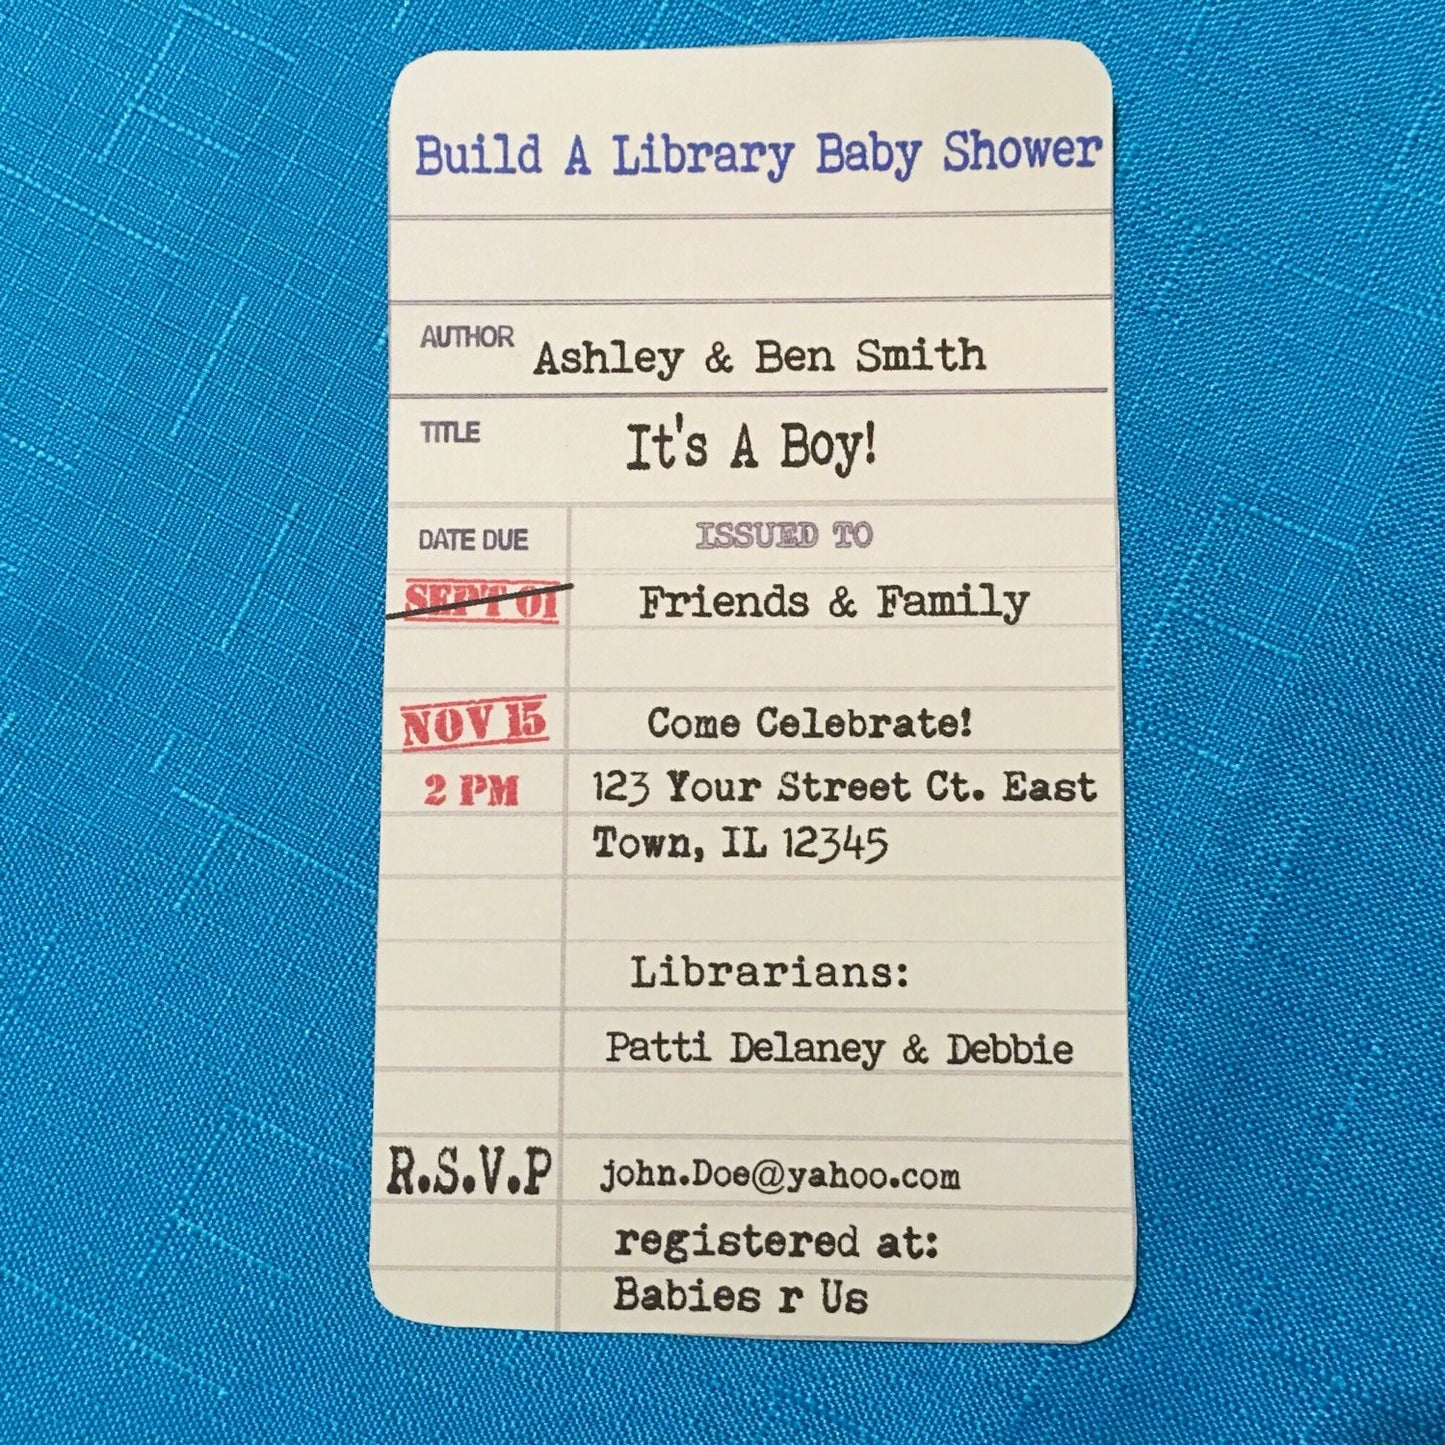 Library Card Baby Shower Invitation set of 12 invites with library card and envelope.